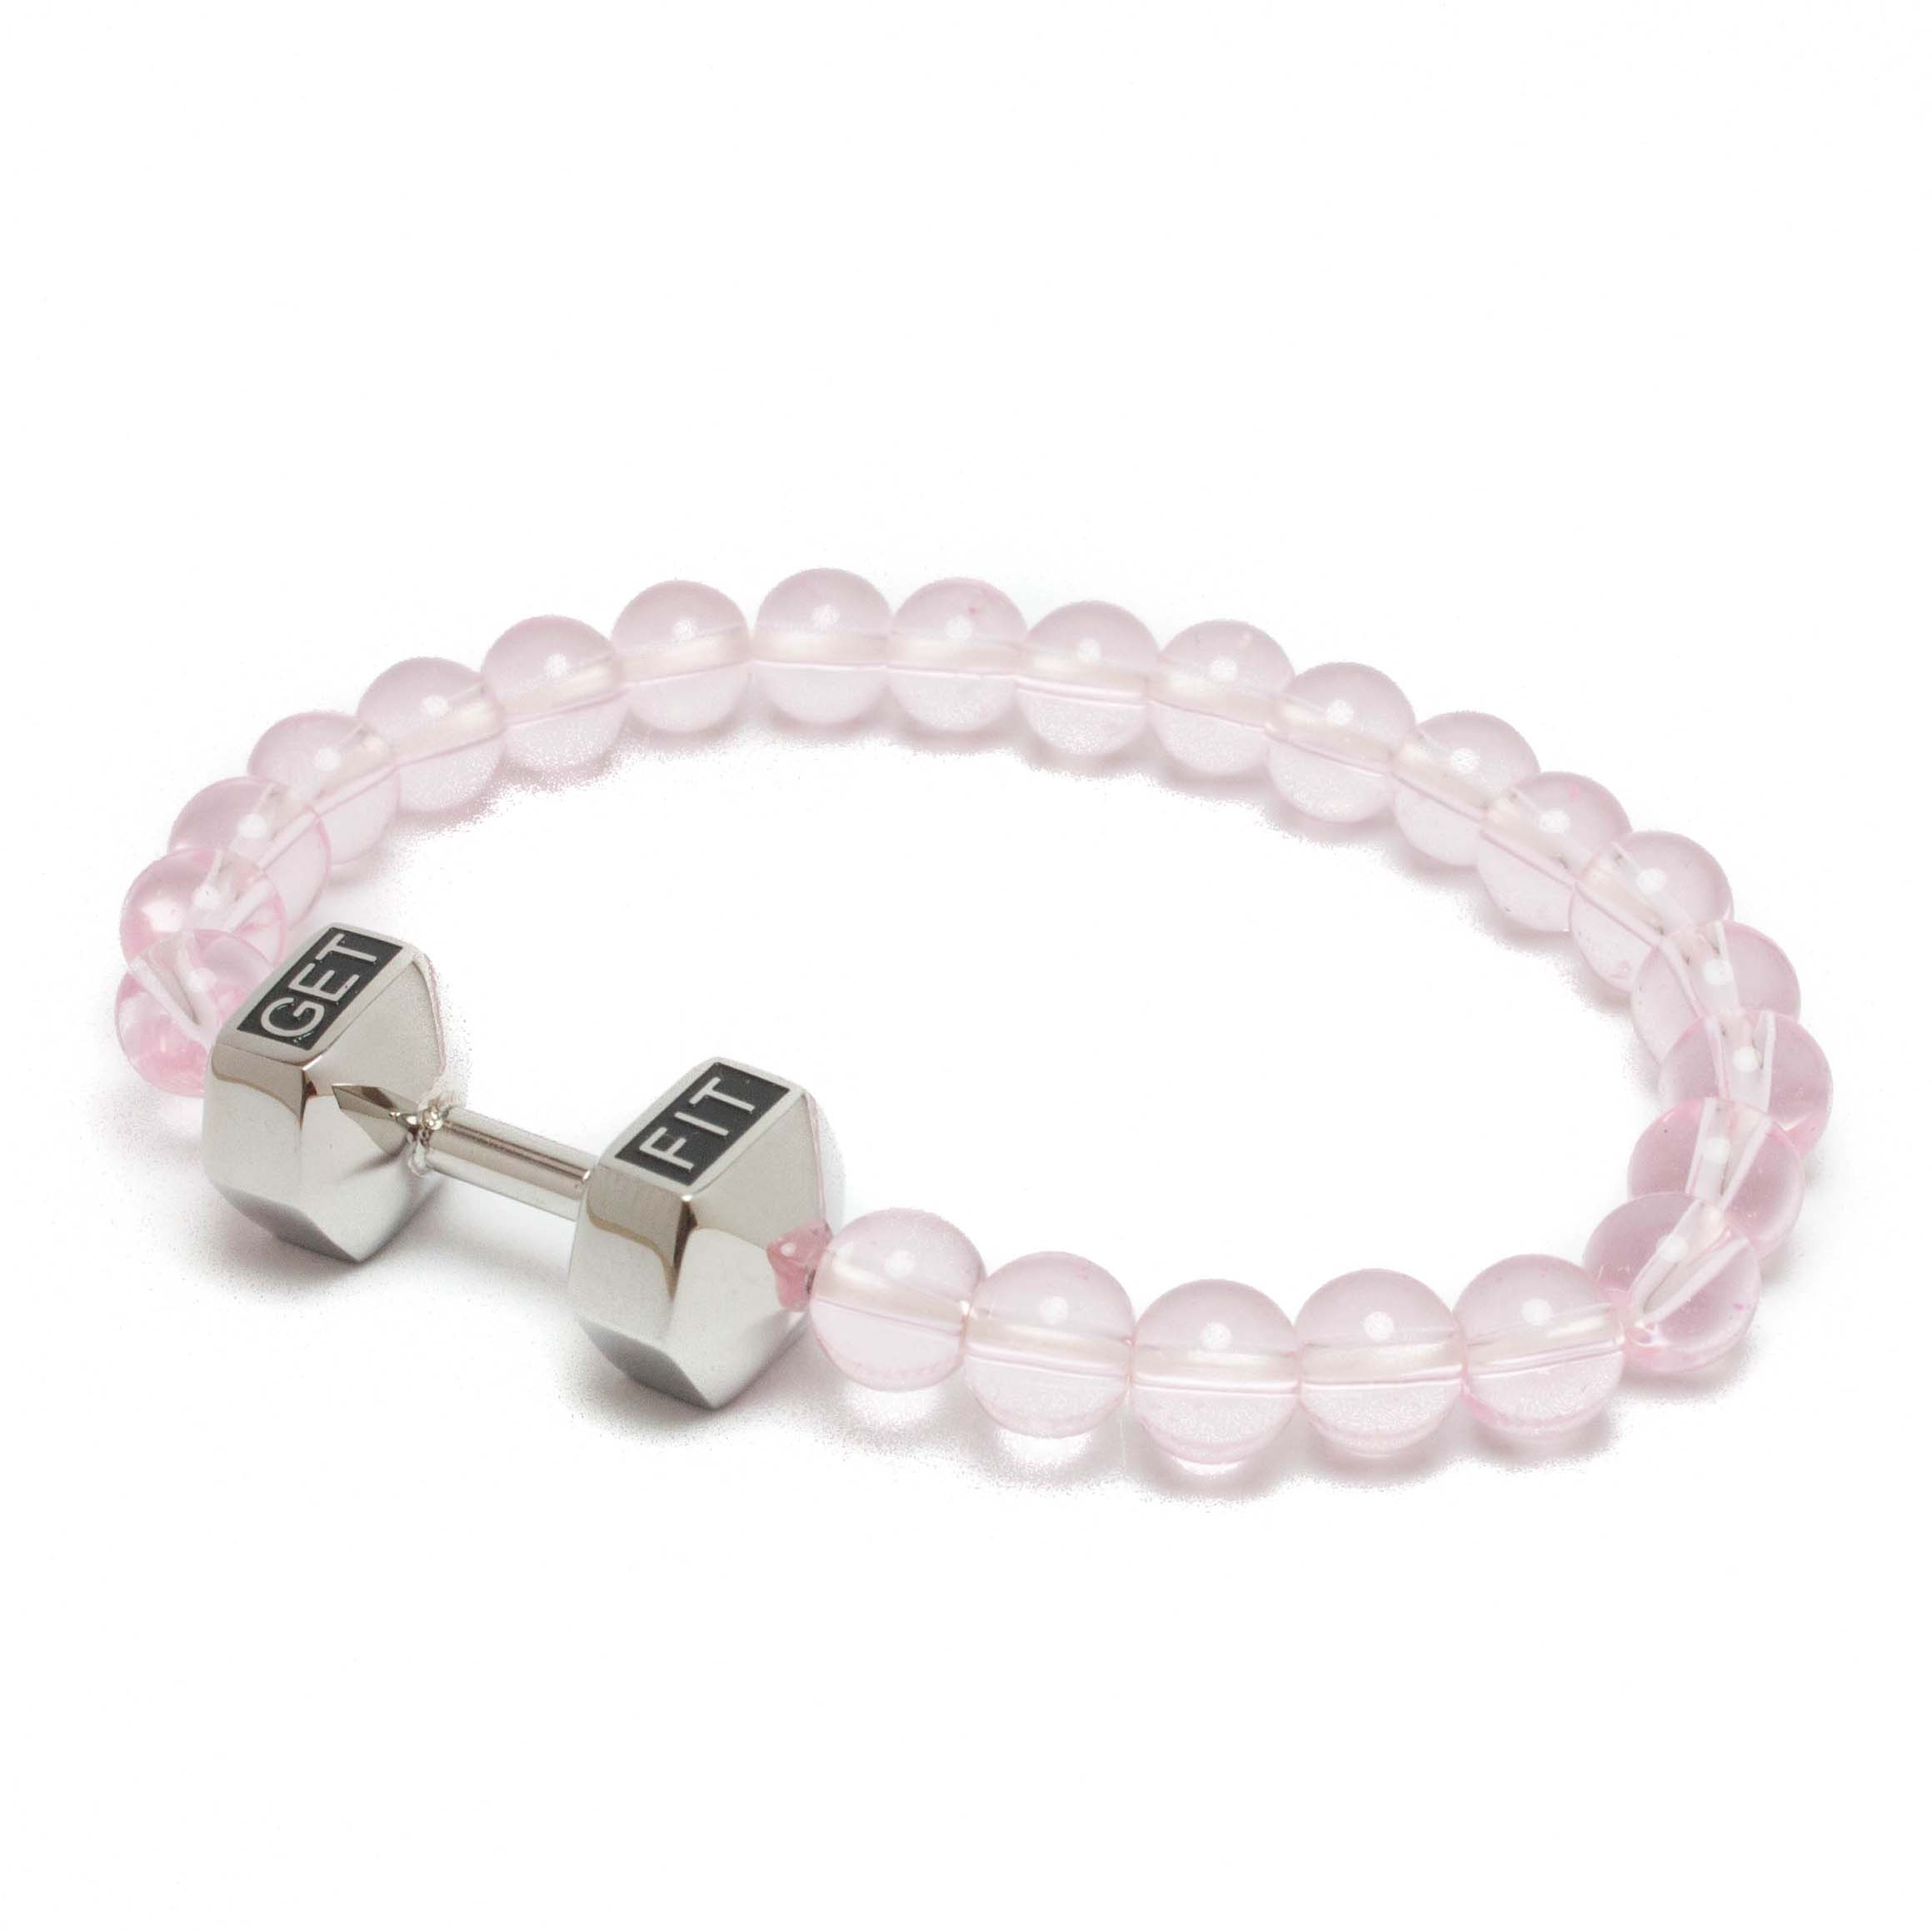 Silver Dumbbell Bracelet with Pink Beads | GETFIT